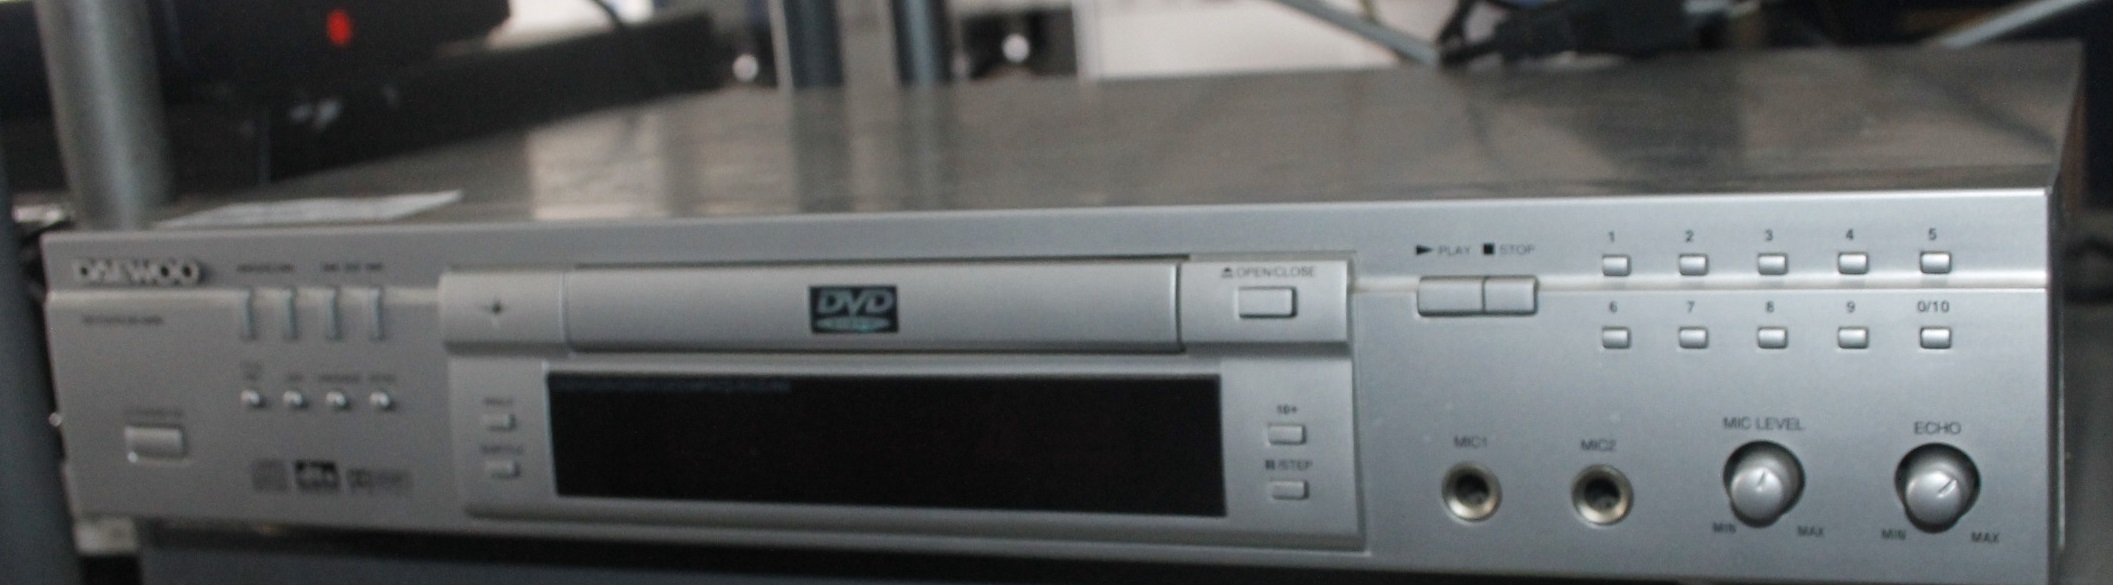 Daewood dvd player with remote S047239A #Rosettenvillepawnshop